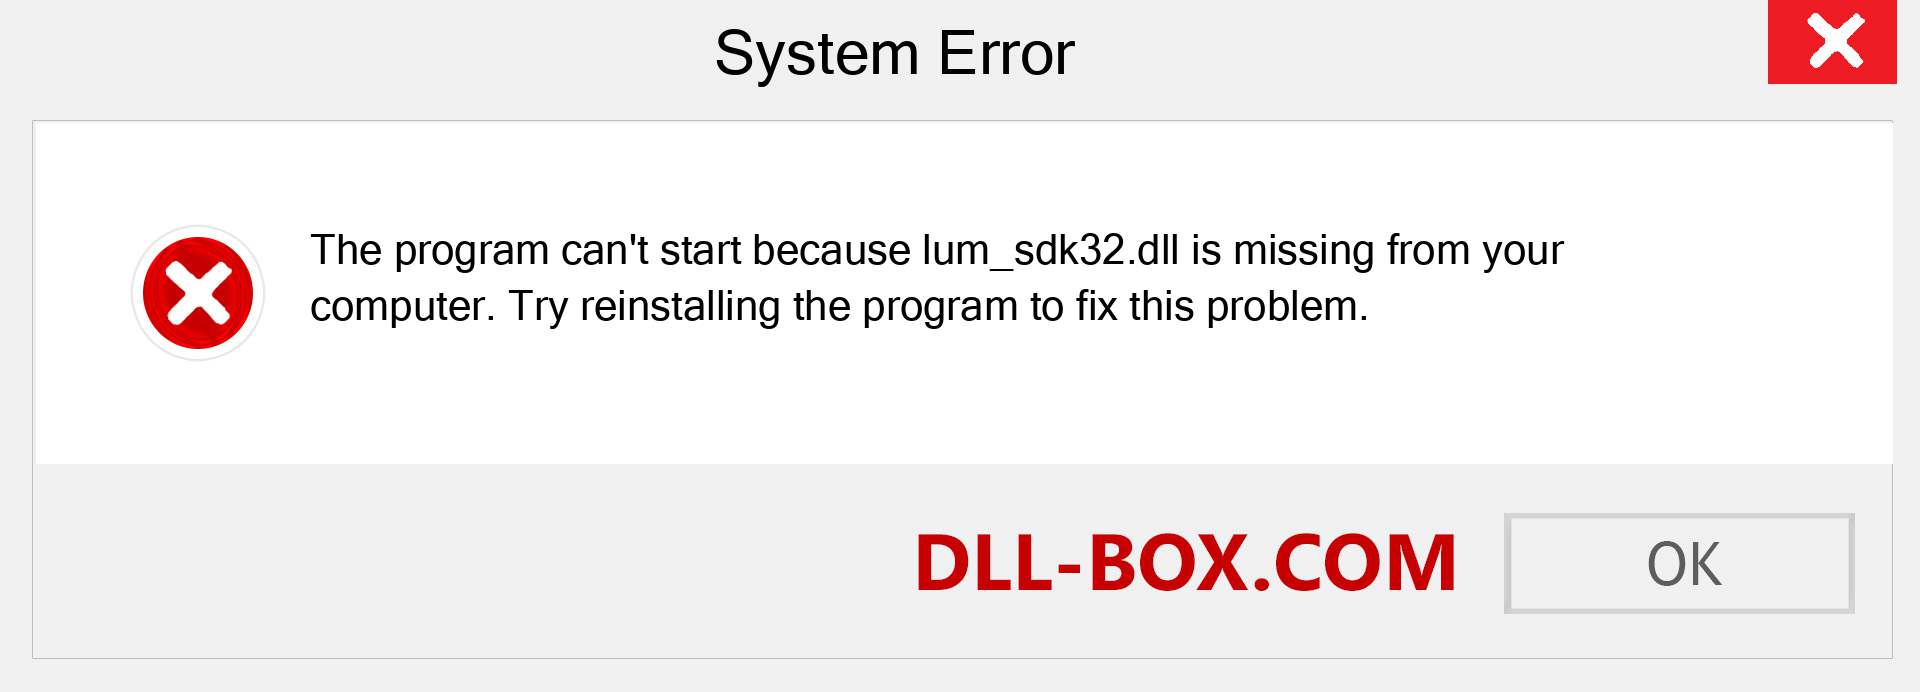  lum_sdk32.dll file is missing?. Download for Windows 7, 8, 10 - Fix  lum_sdk32 dll Missing Error on Windows, photos, images